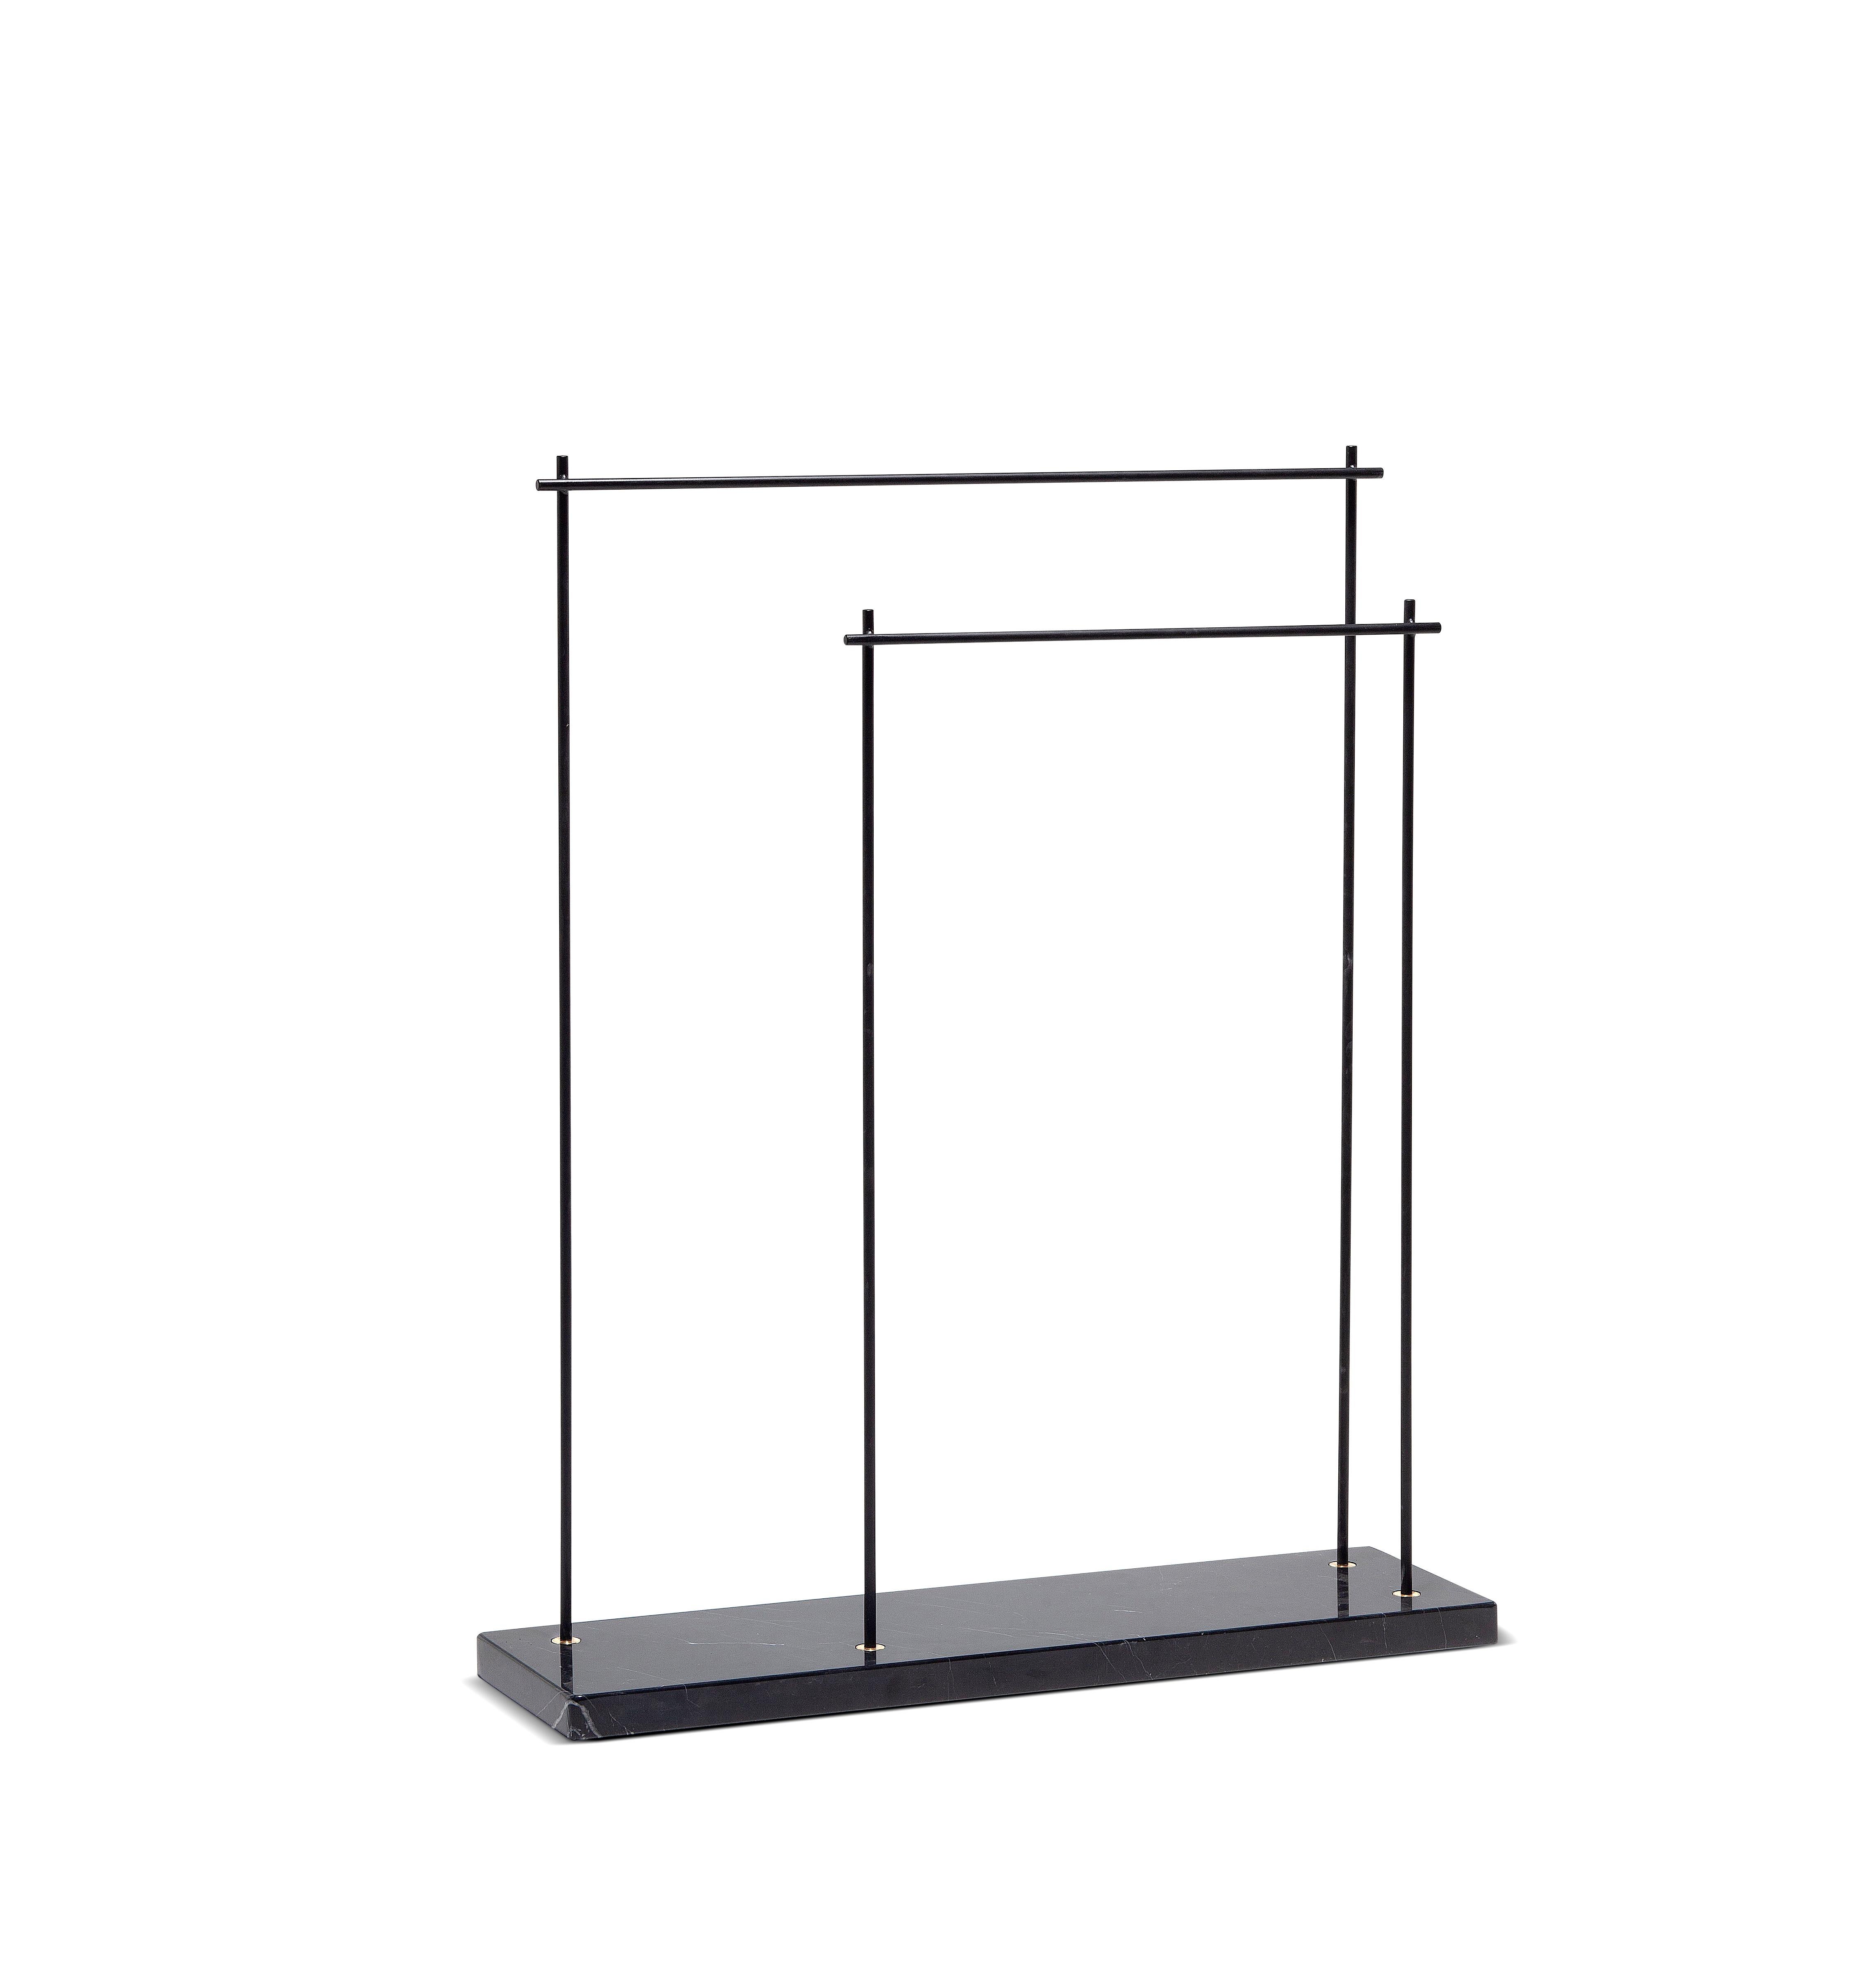 Rack towel holder by Joseph Vila Capdevila
Material: Marquina marble and black lacquered iron
Dimensions: 70 x 84.5 x 20 cm
Weight: 13.2 kg

Aparentment is a space for creation and innovation, experimenting with materials with the goal to